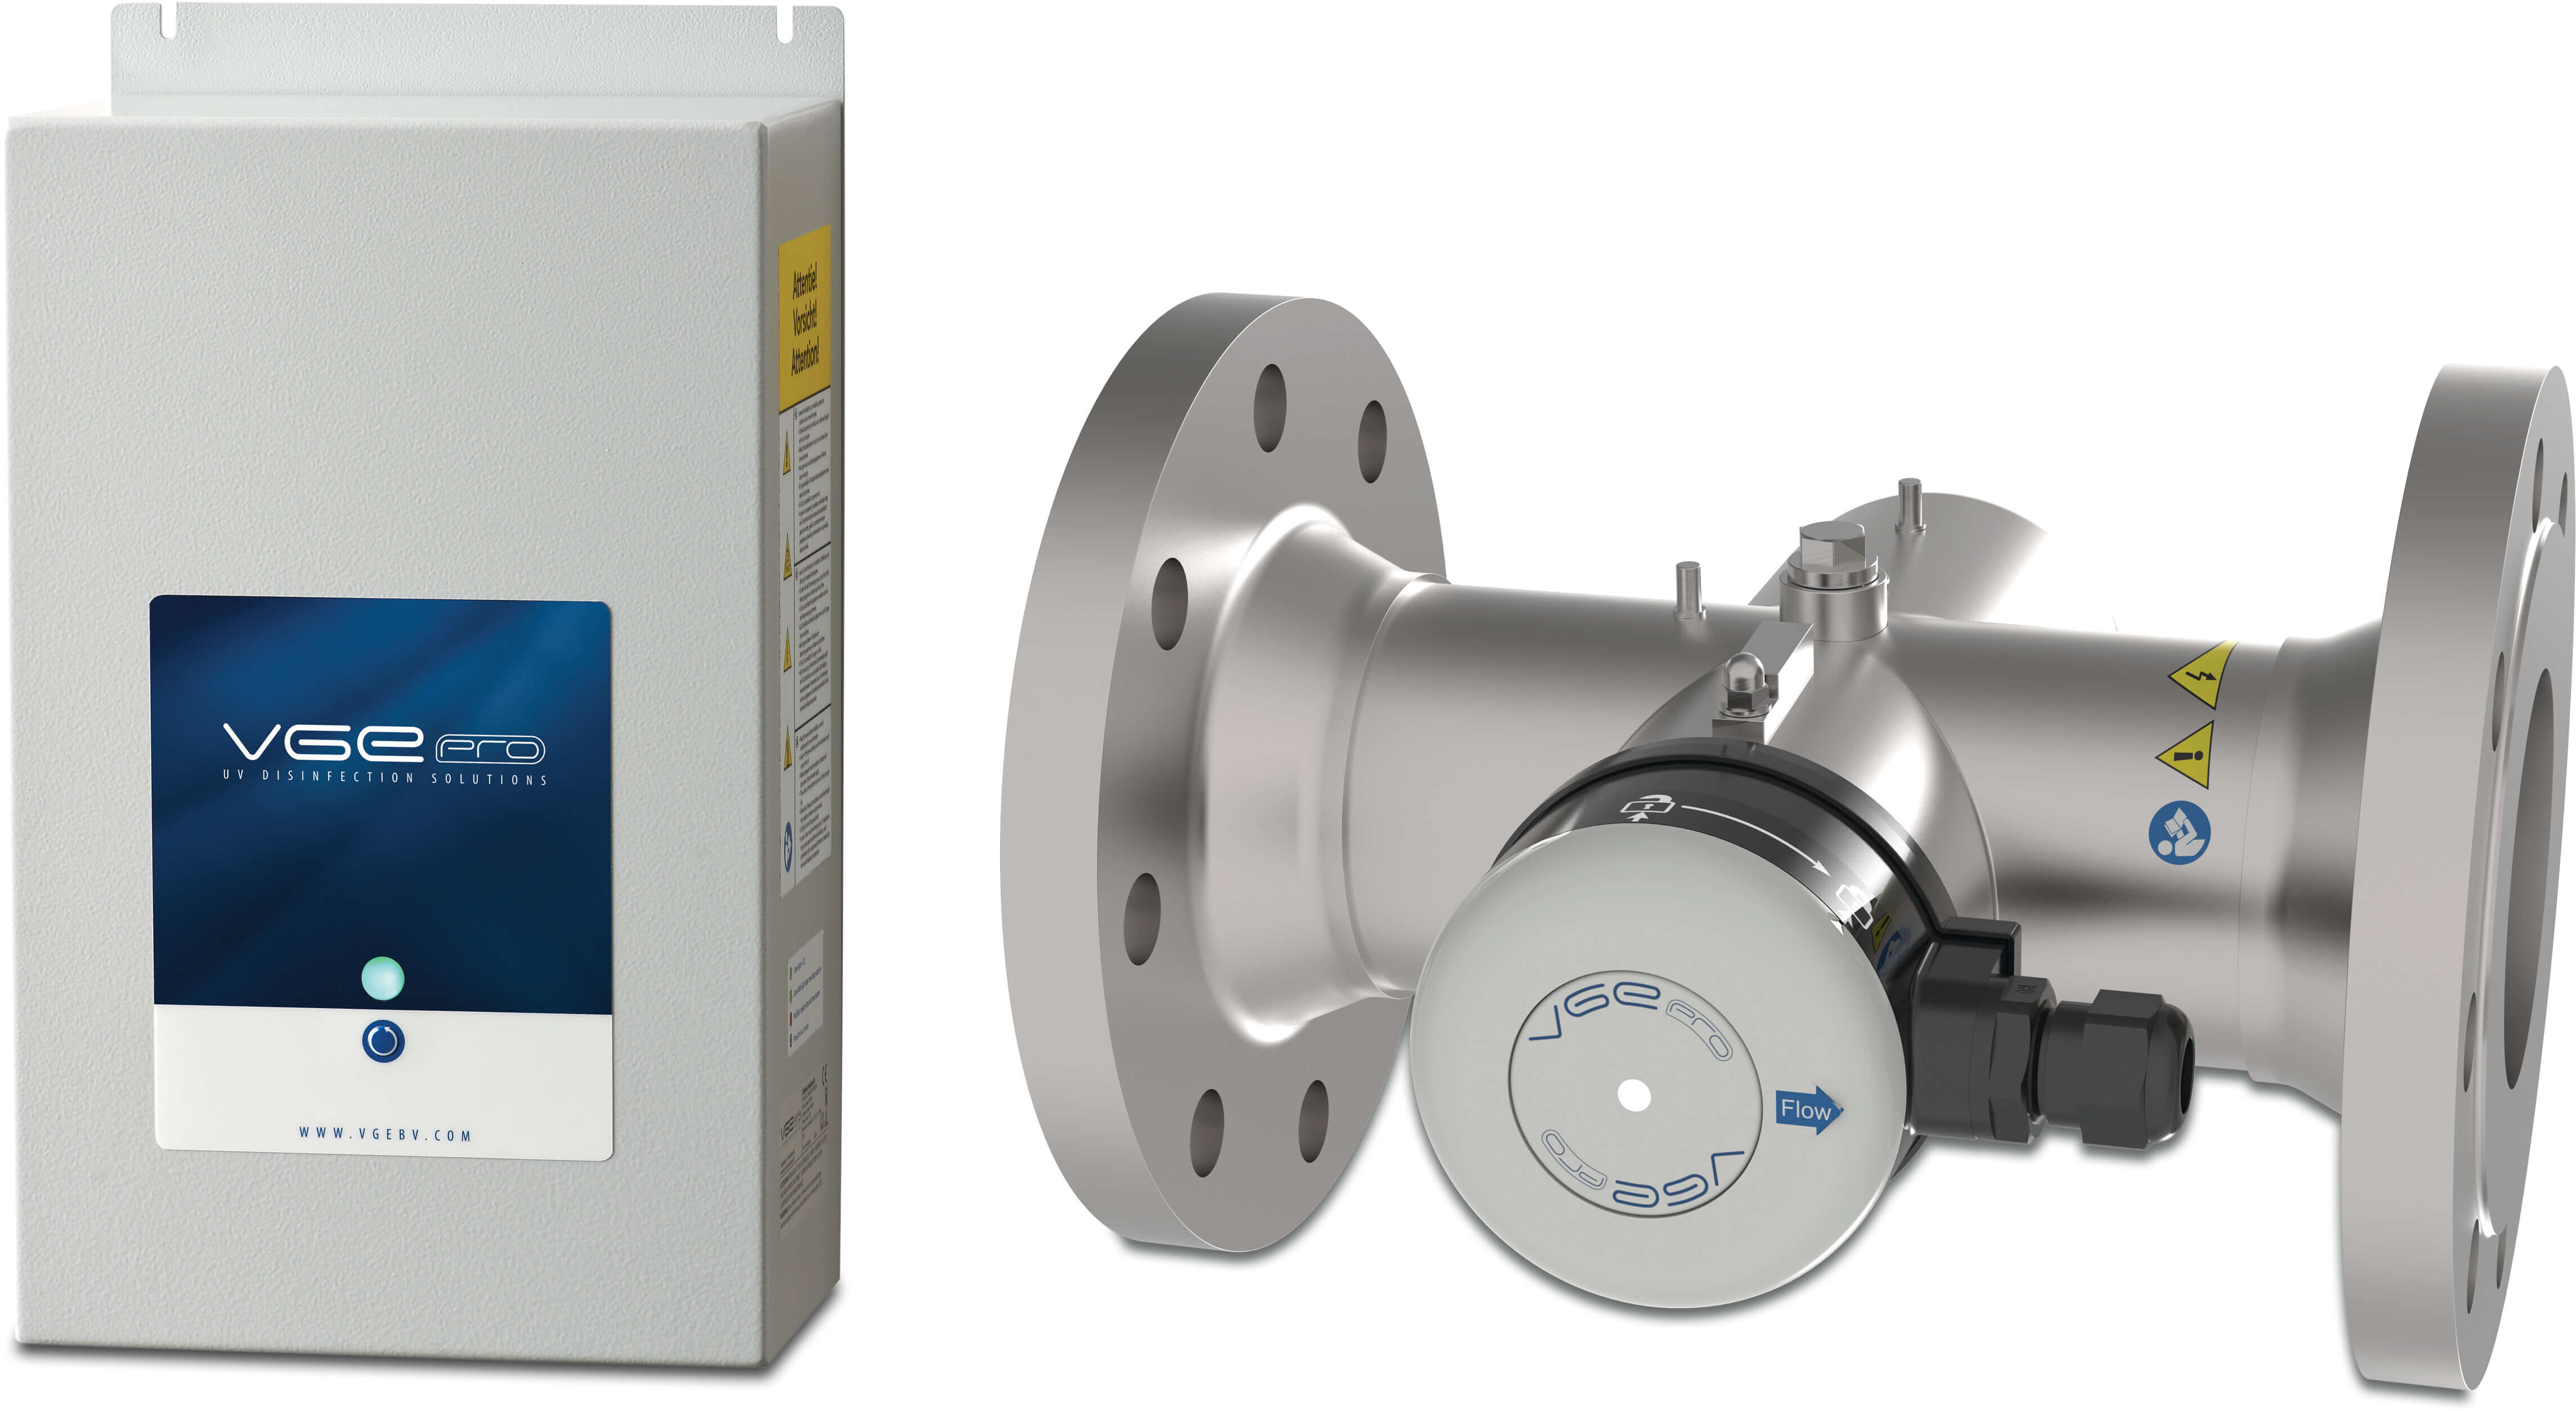 VGE Pro Medium pressure lamp UV system stainless steel 316L DN80 flange 10bar type 600-85 Compact